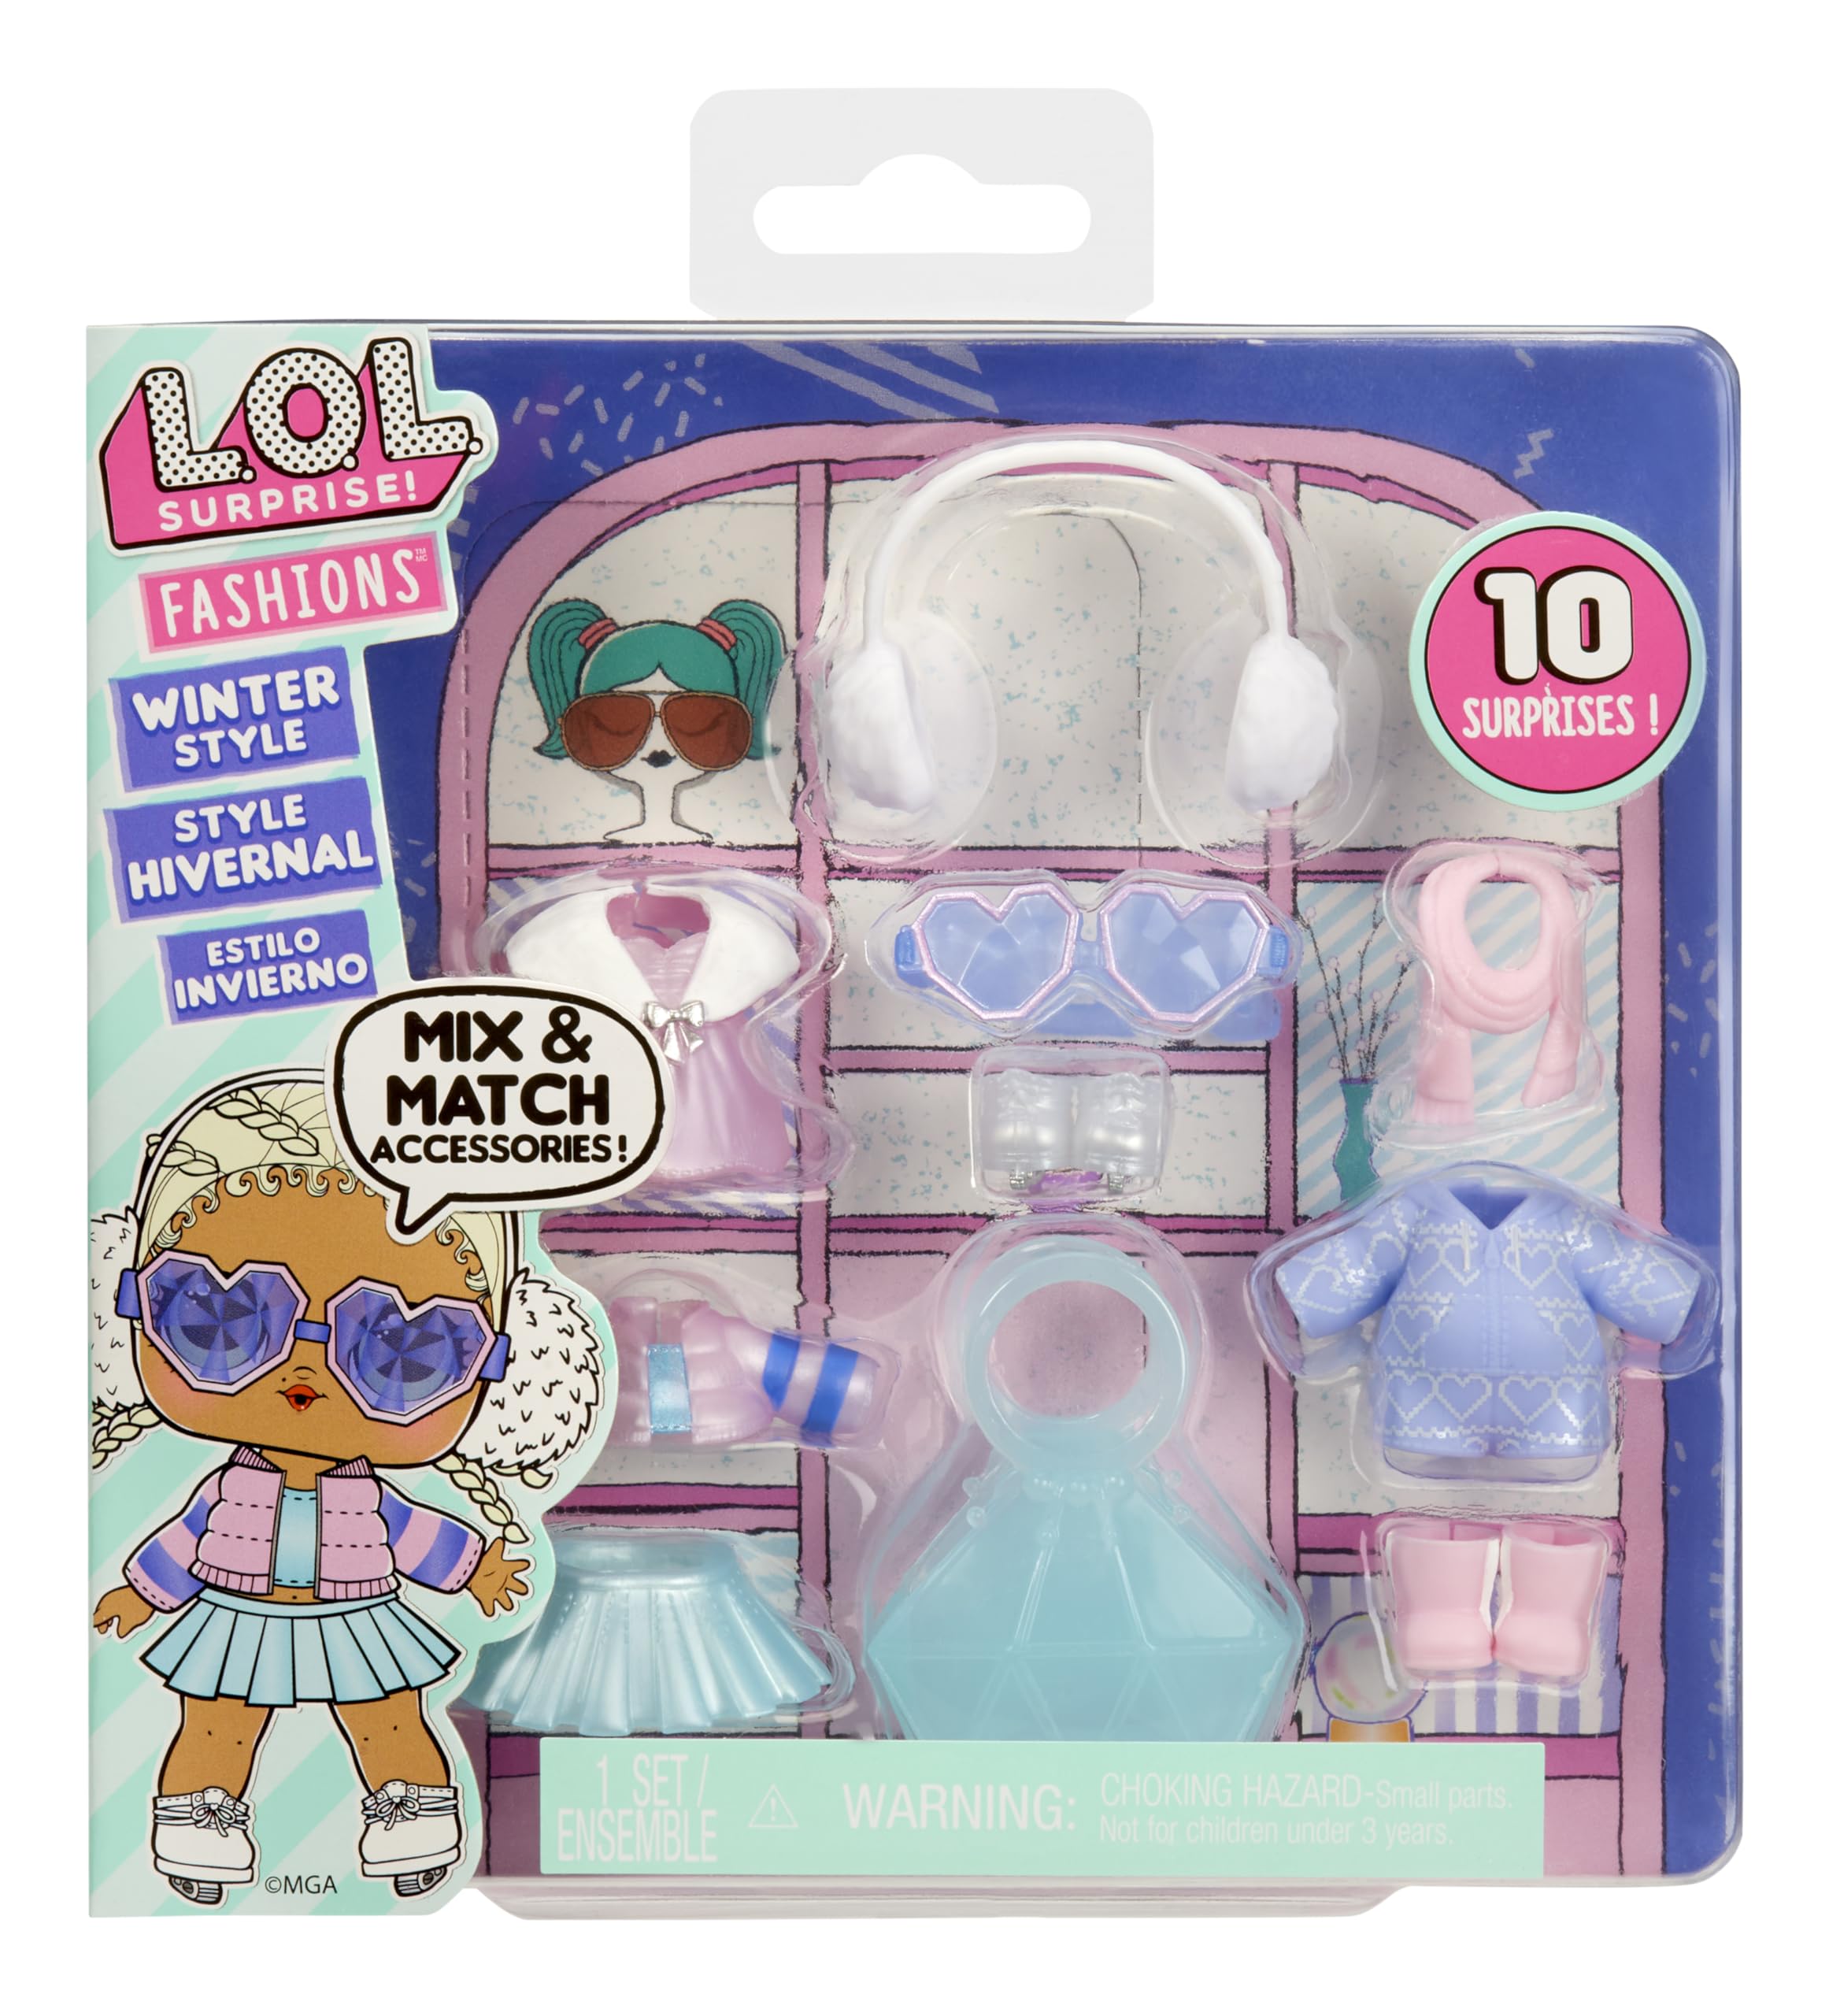 LOL Surprise Fashion Packs Winter Style - 6 Unique Styles Each with (3) Outfits, (2) Pairs of Shoes, (4) Accessories – Mix and Match Styles to Create Tons of New Looks - Great Gift for Girls Age 4+